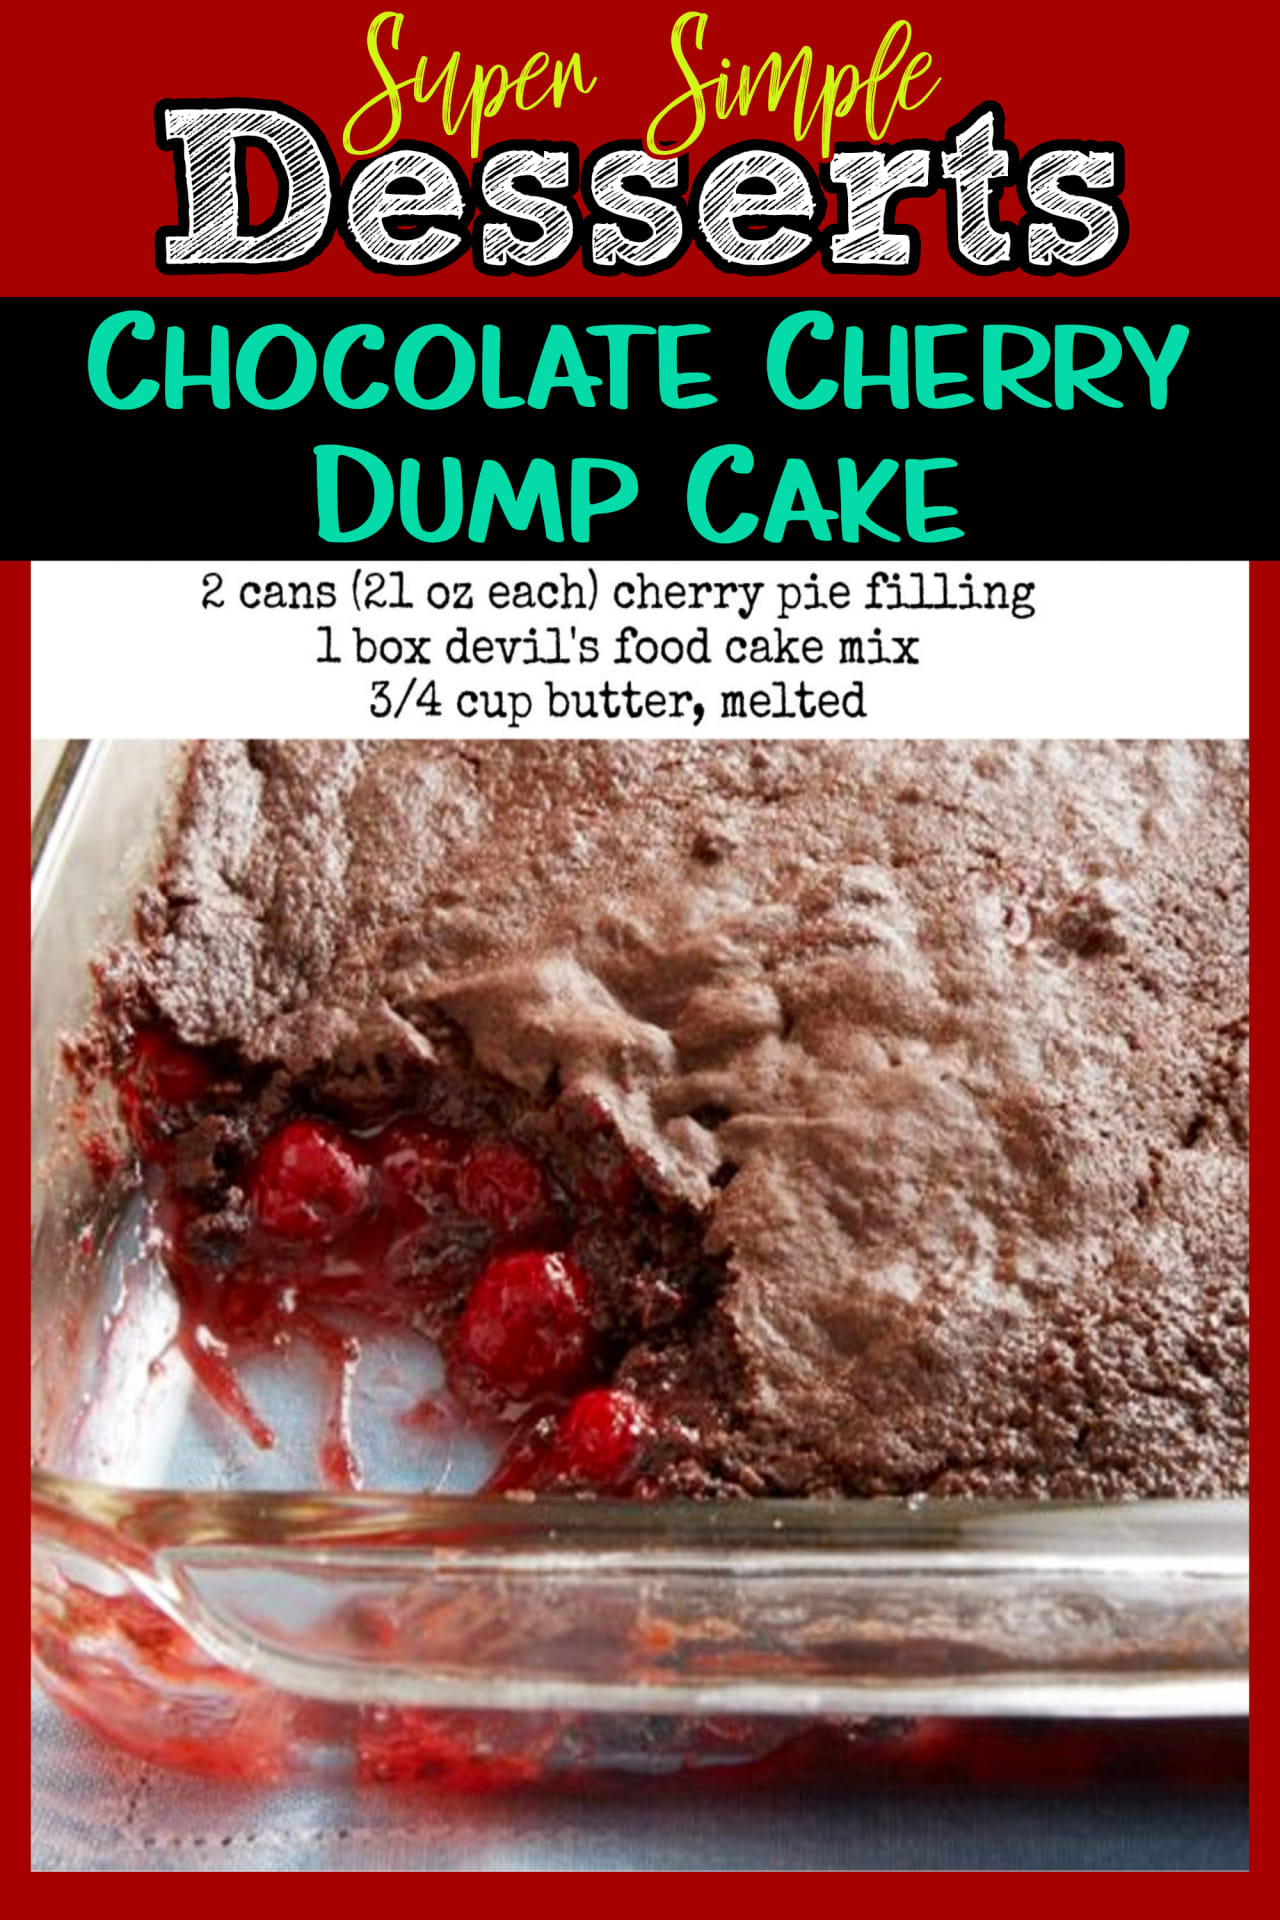 easy chocolate dump cake recipes with cake mix and cherry pie filling